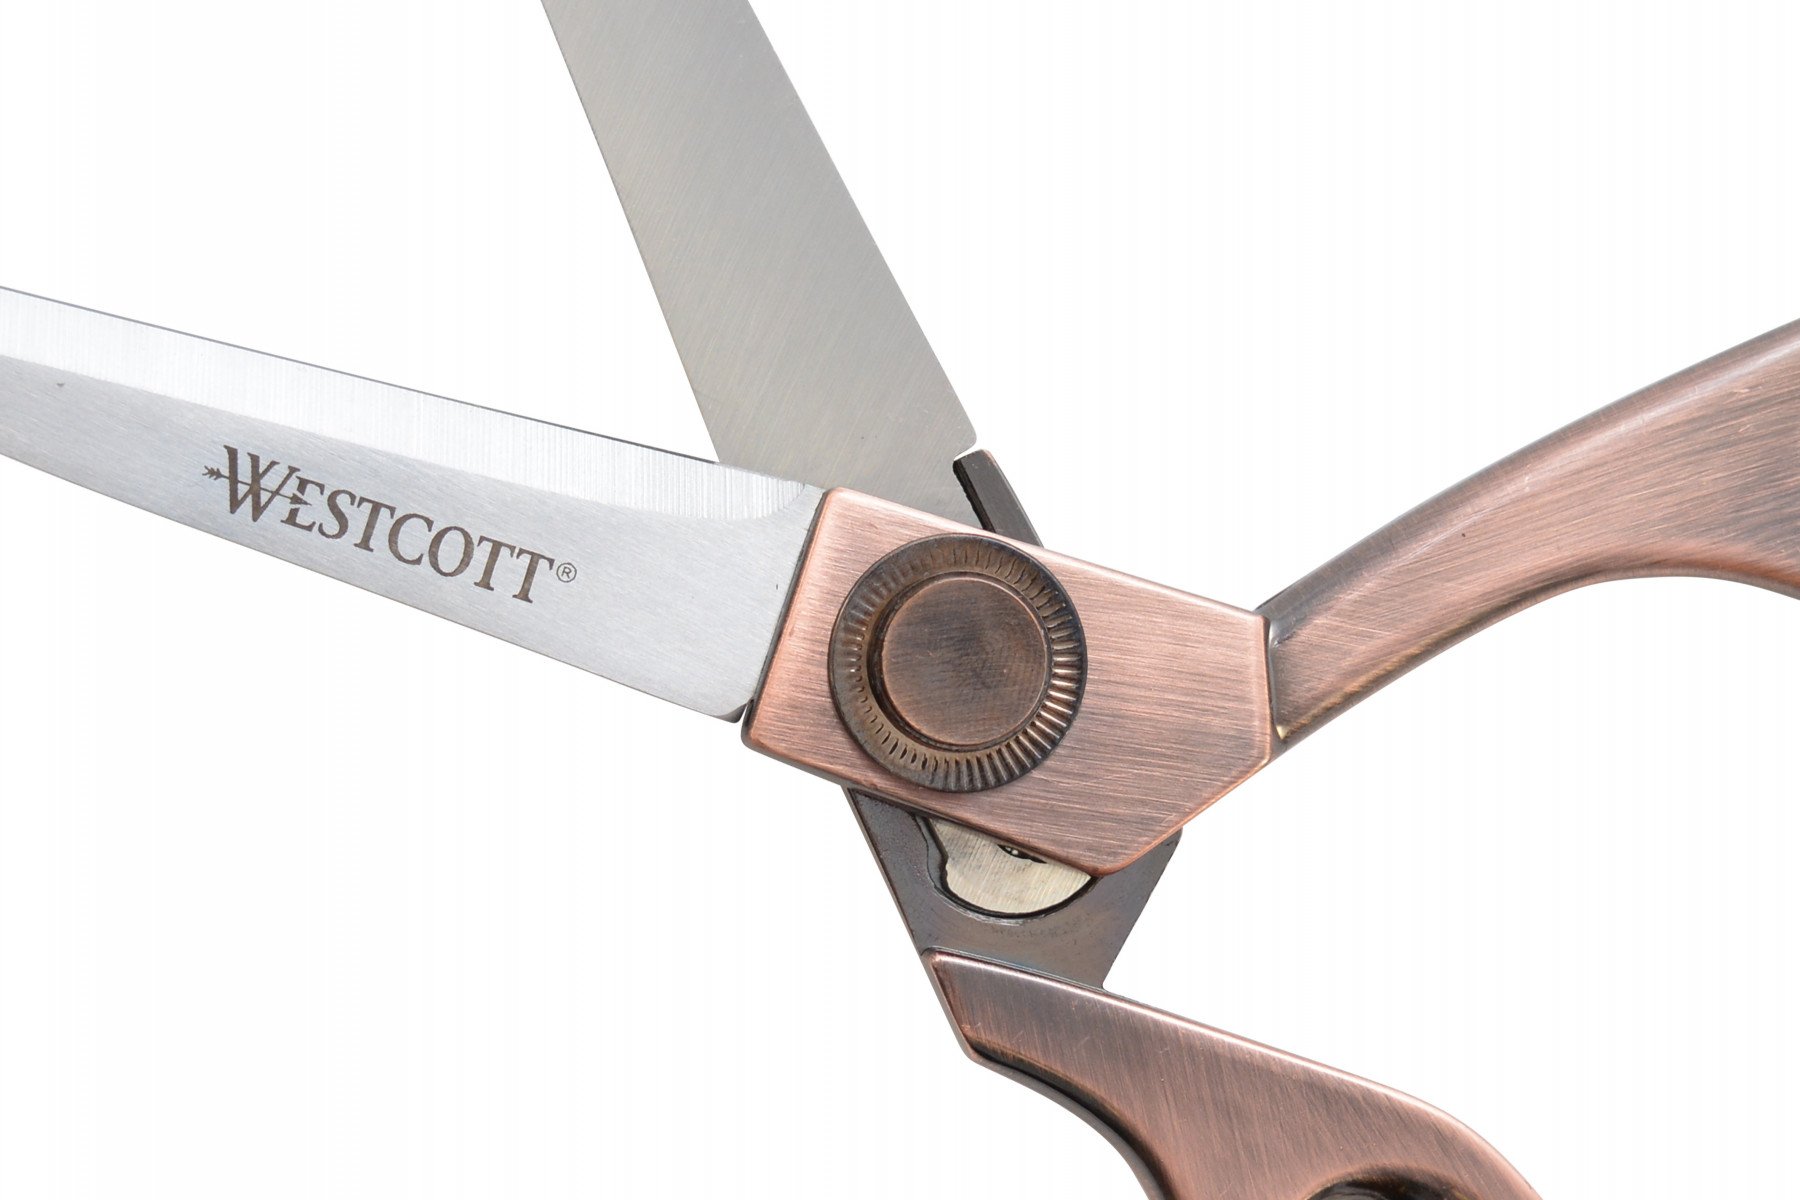 Westcott 16459 8-Inch Stainless Steel Copper-Finish Scissors For Office and Home